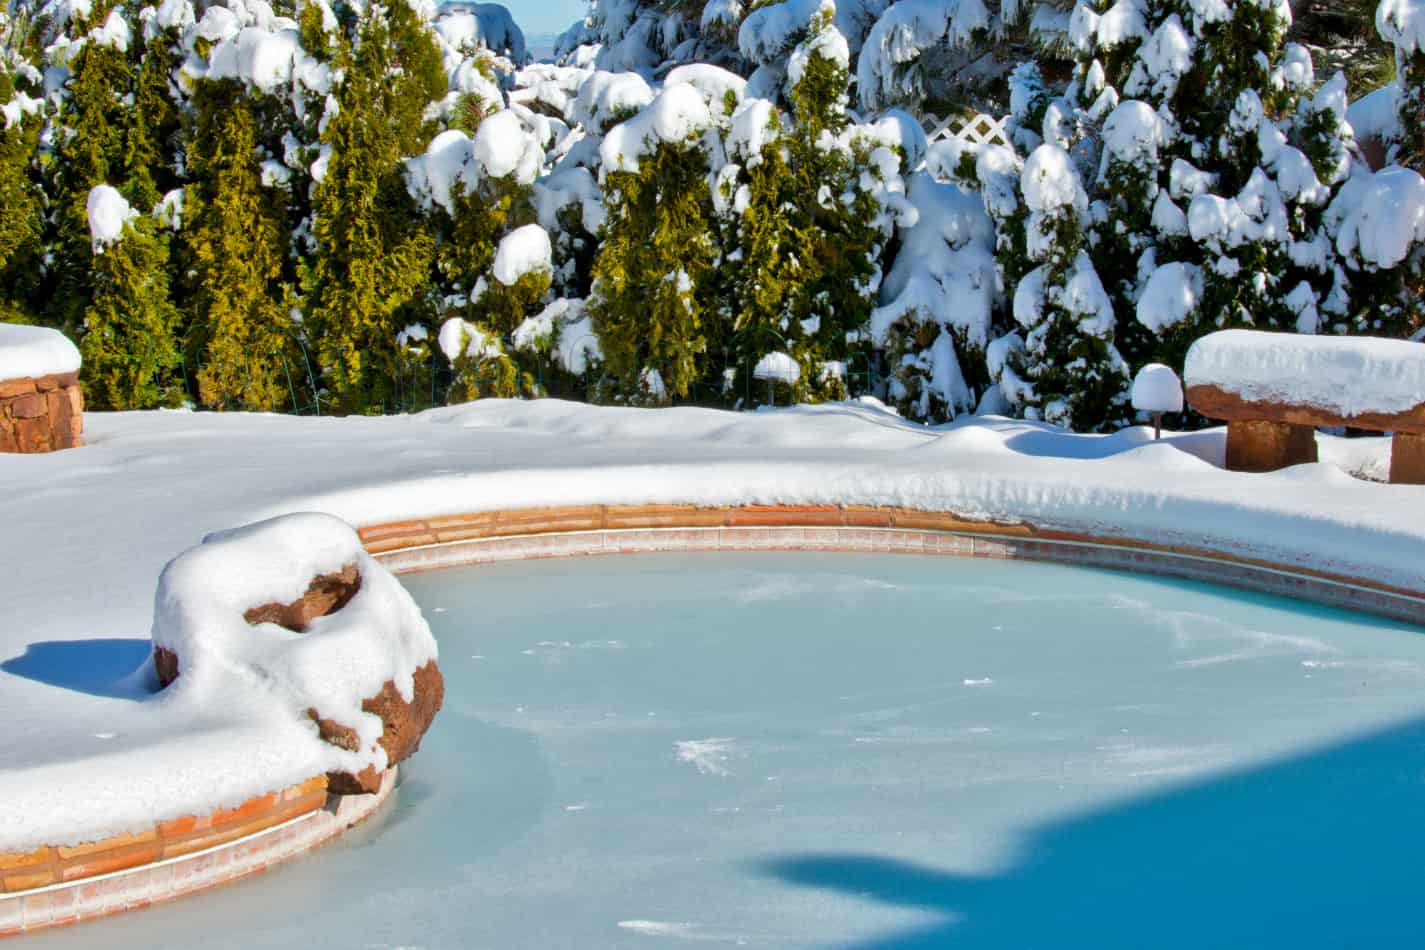 Pool covered in snow in the dead of winter